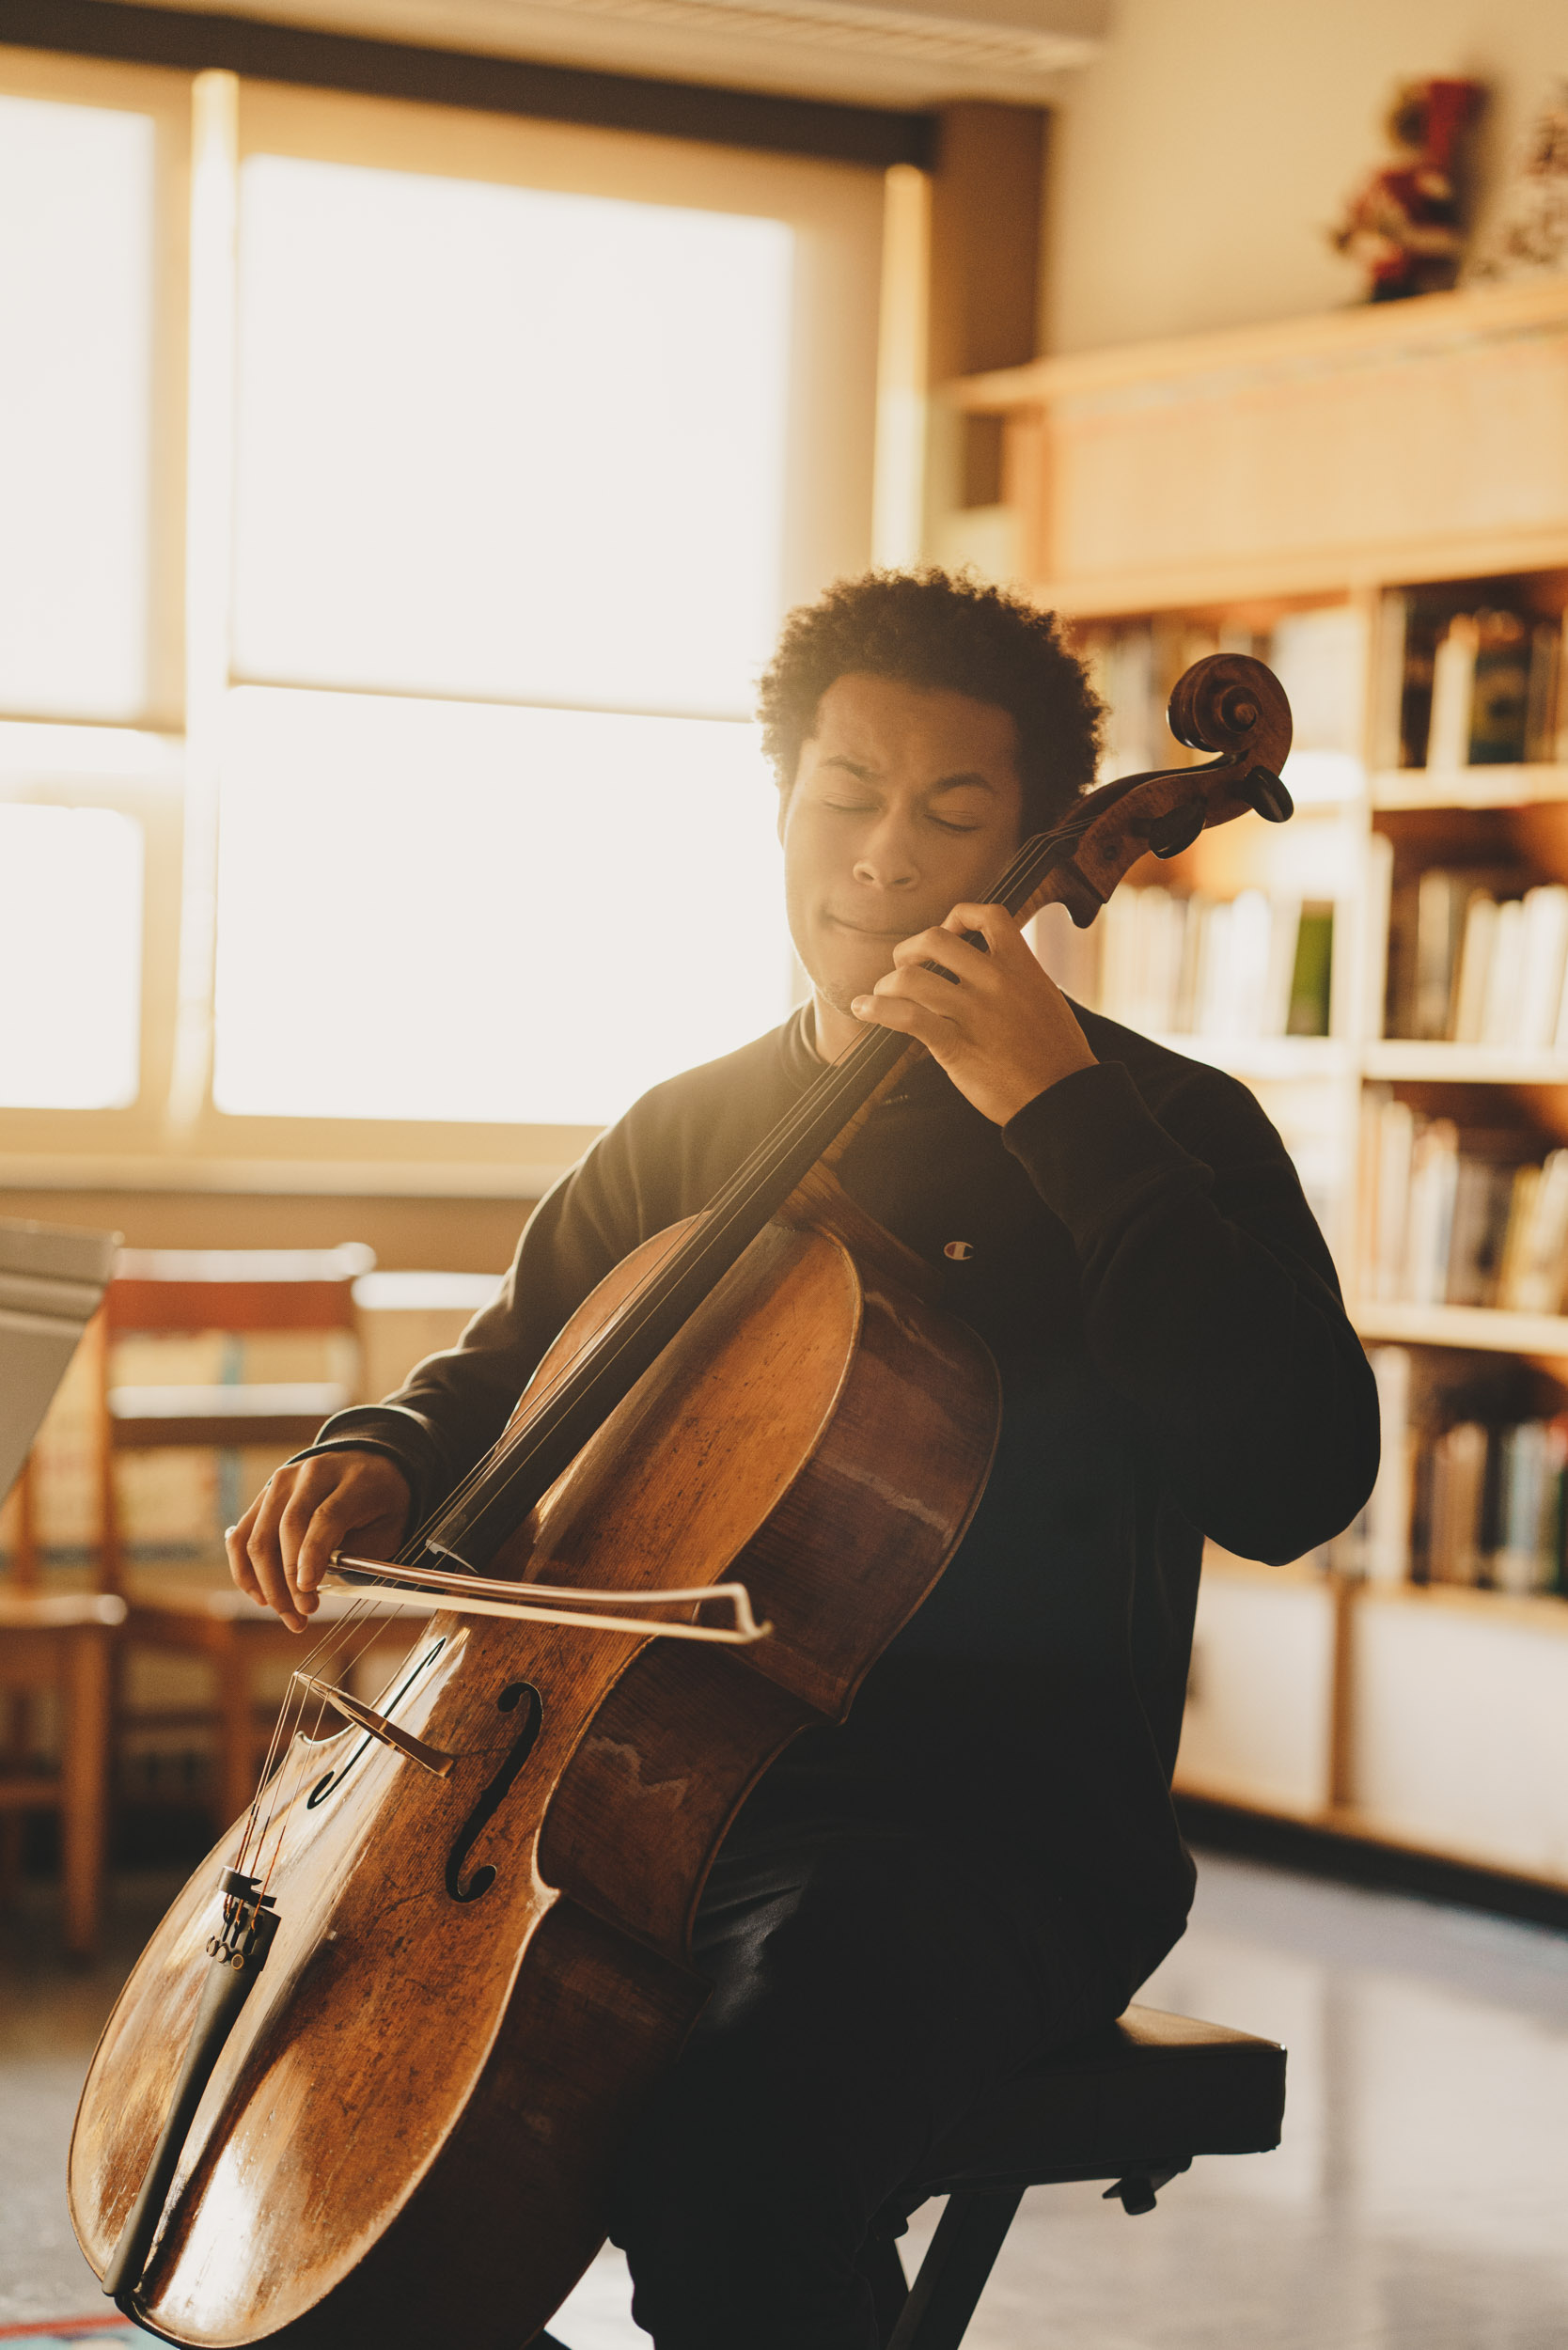 Sheku Kanneh-Mason, a famous cellist from London, practices in a classroom at Mary Ann Winterling Elementary School